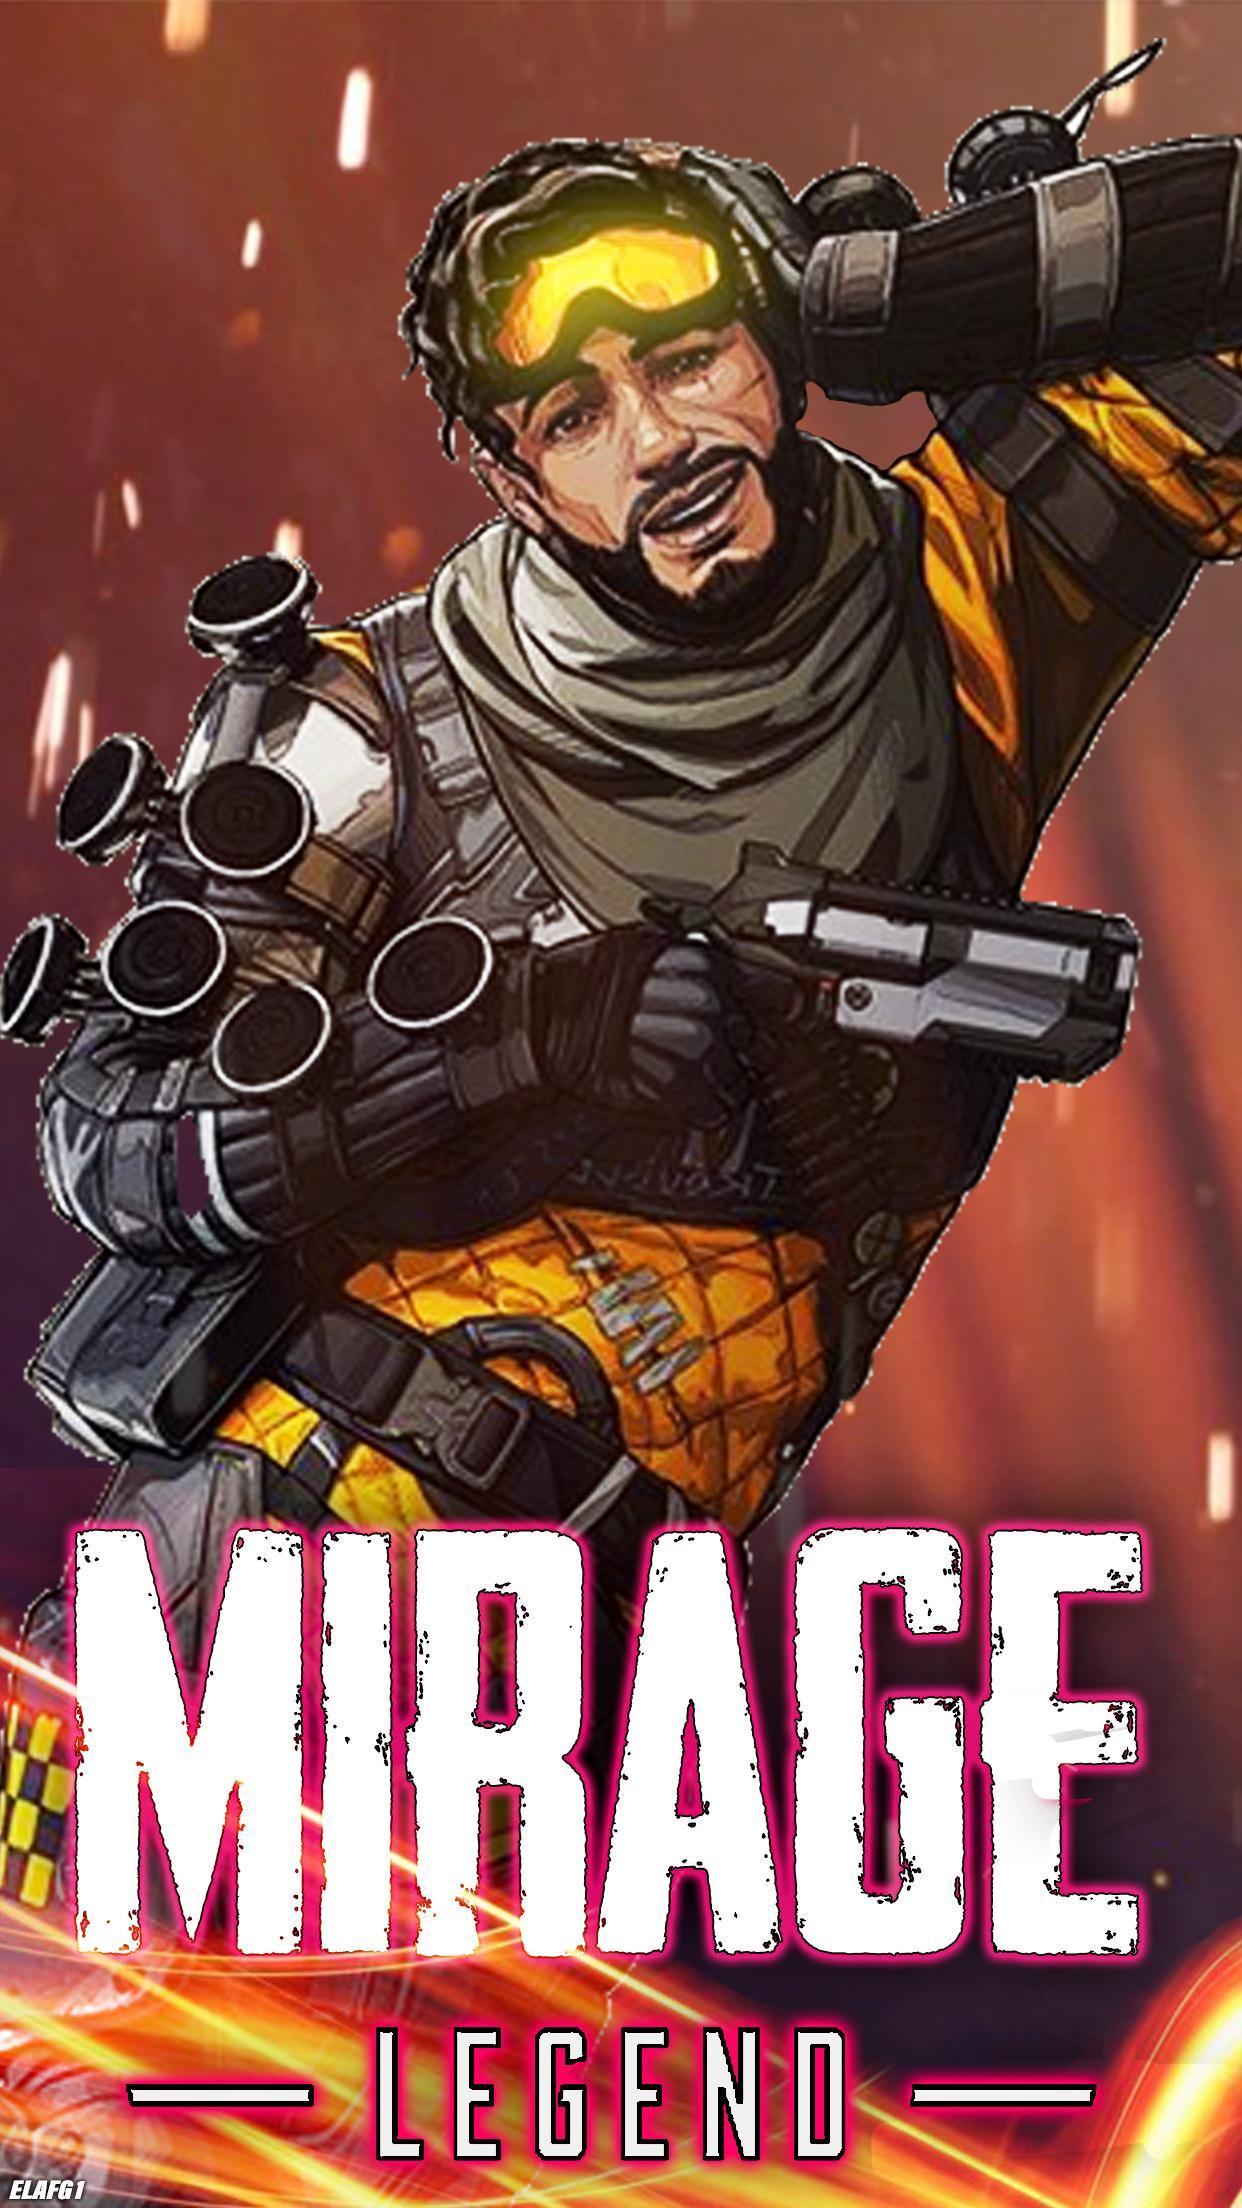 A Mirage iPhone wallpaper Keep requests for the next legend coming   rapexlegends